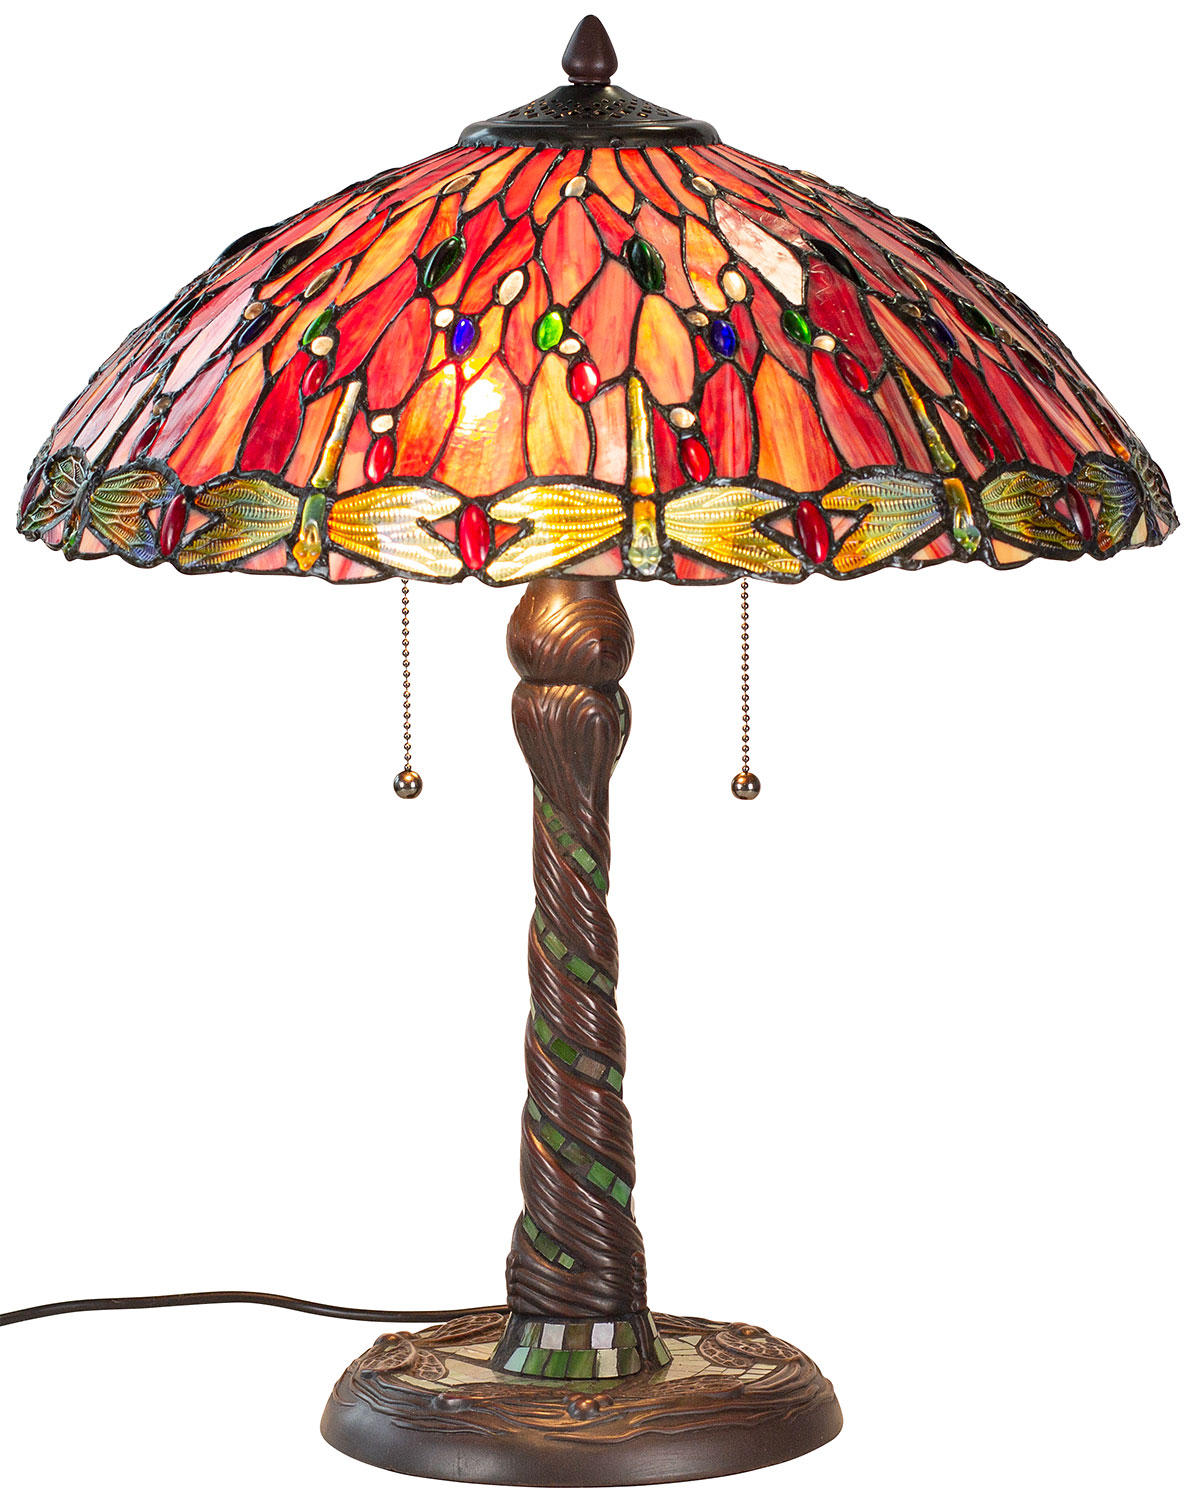 Table lamp "Dragonfly" - after Louis C. Tiffany